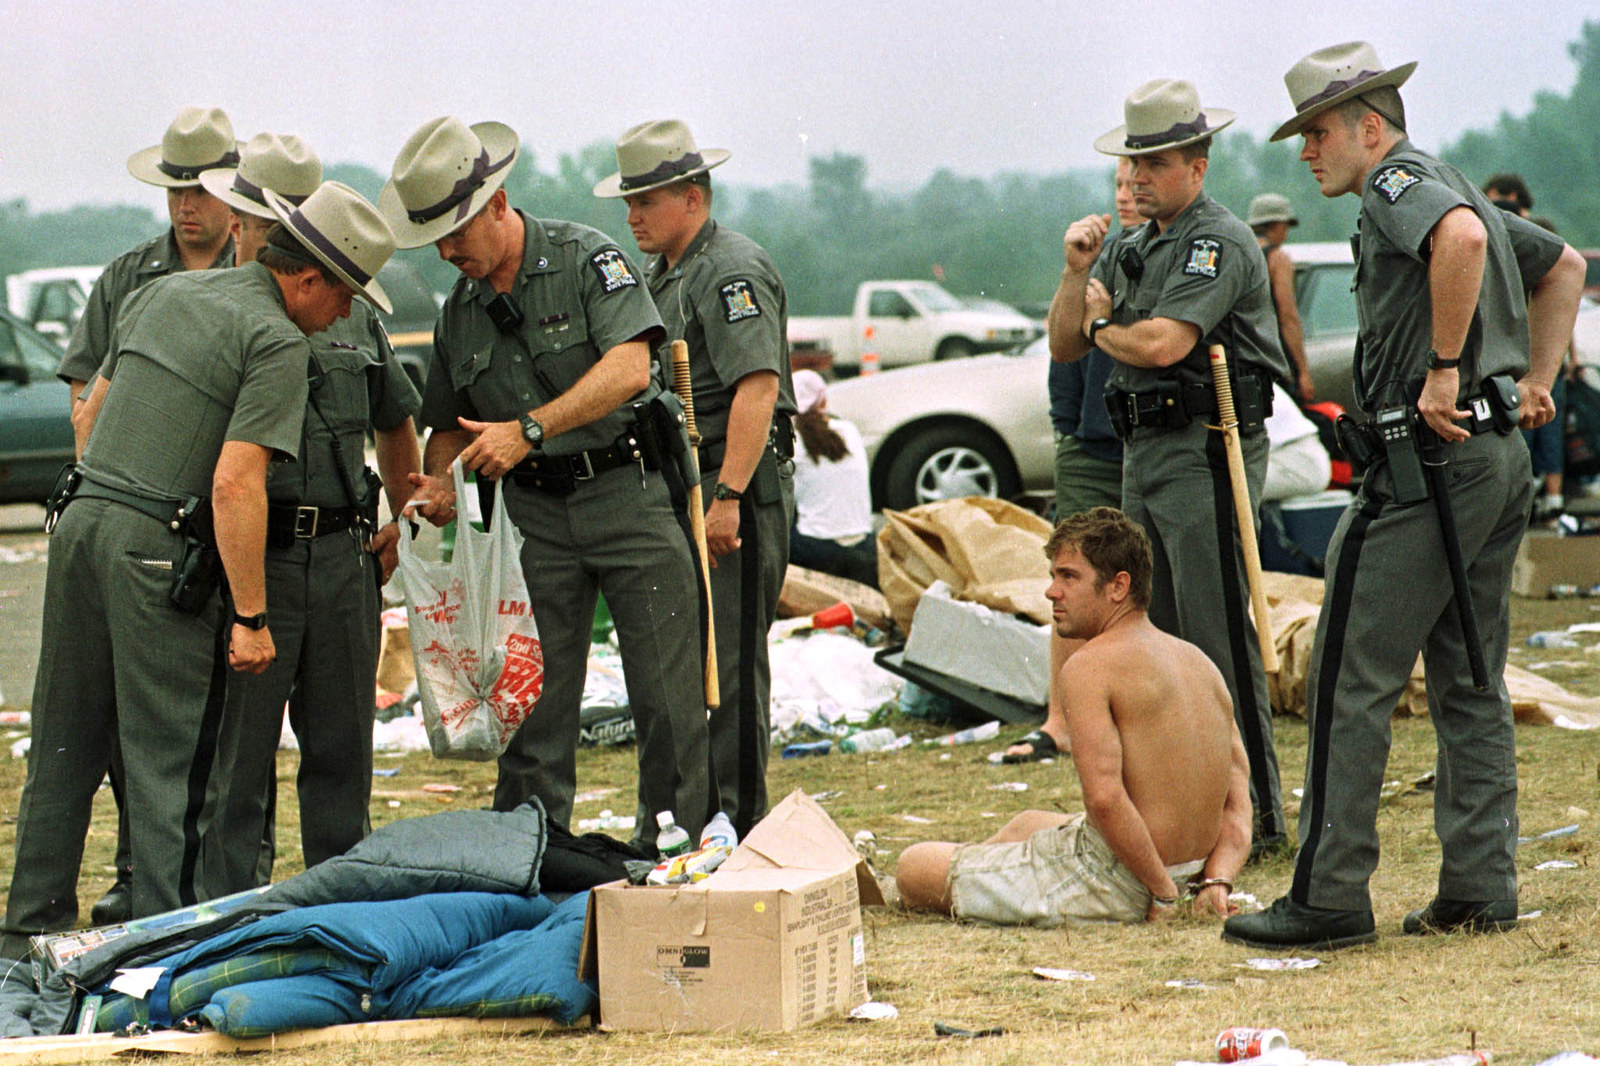 These Pictures Show Just How Much Of A Shitshow Woodstock '99 Was.